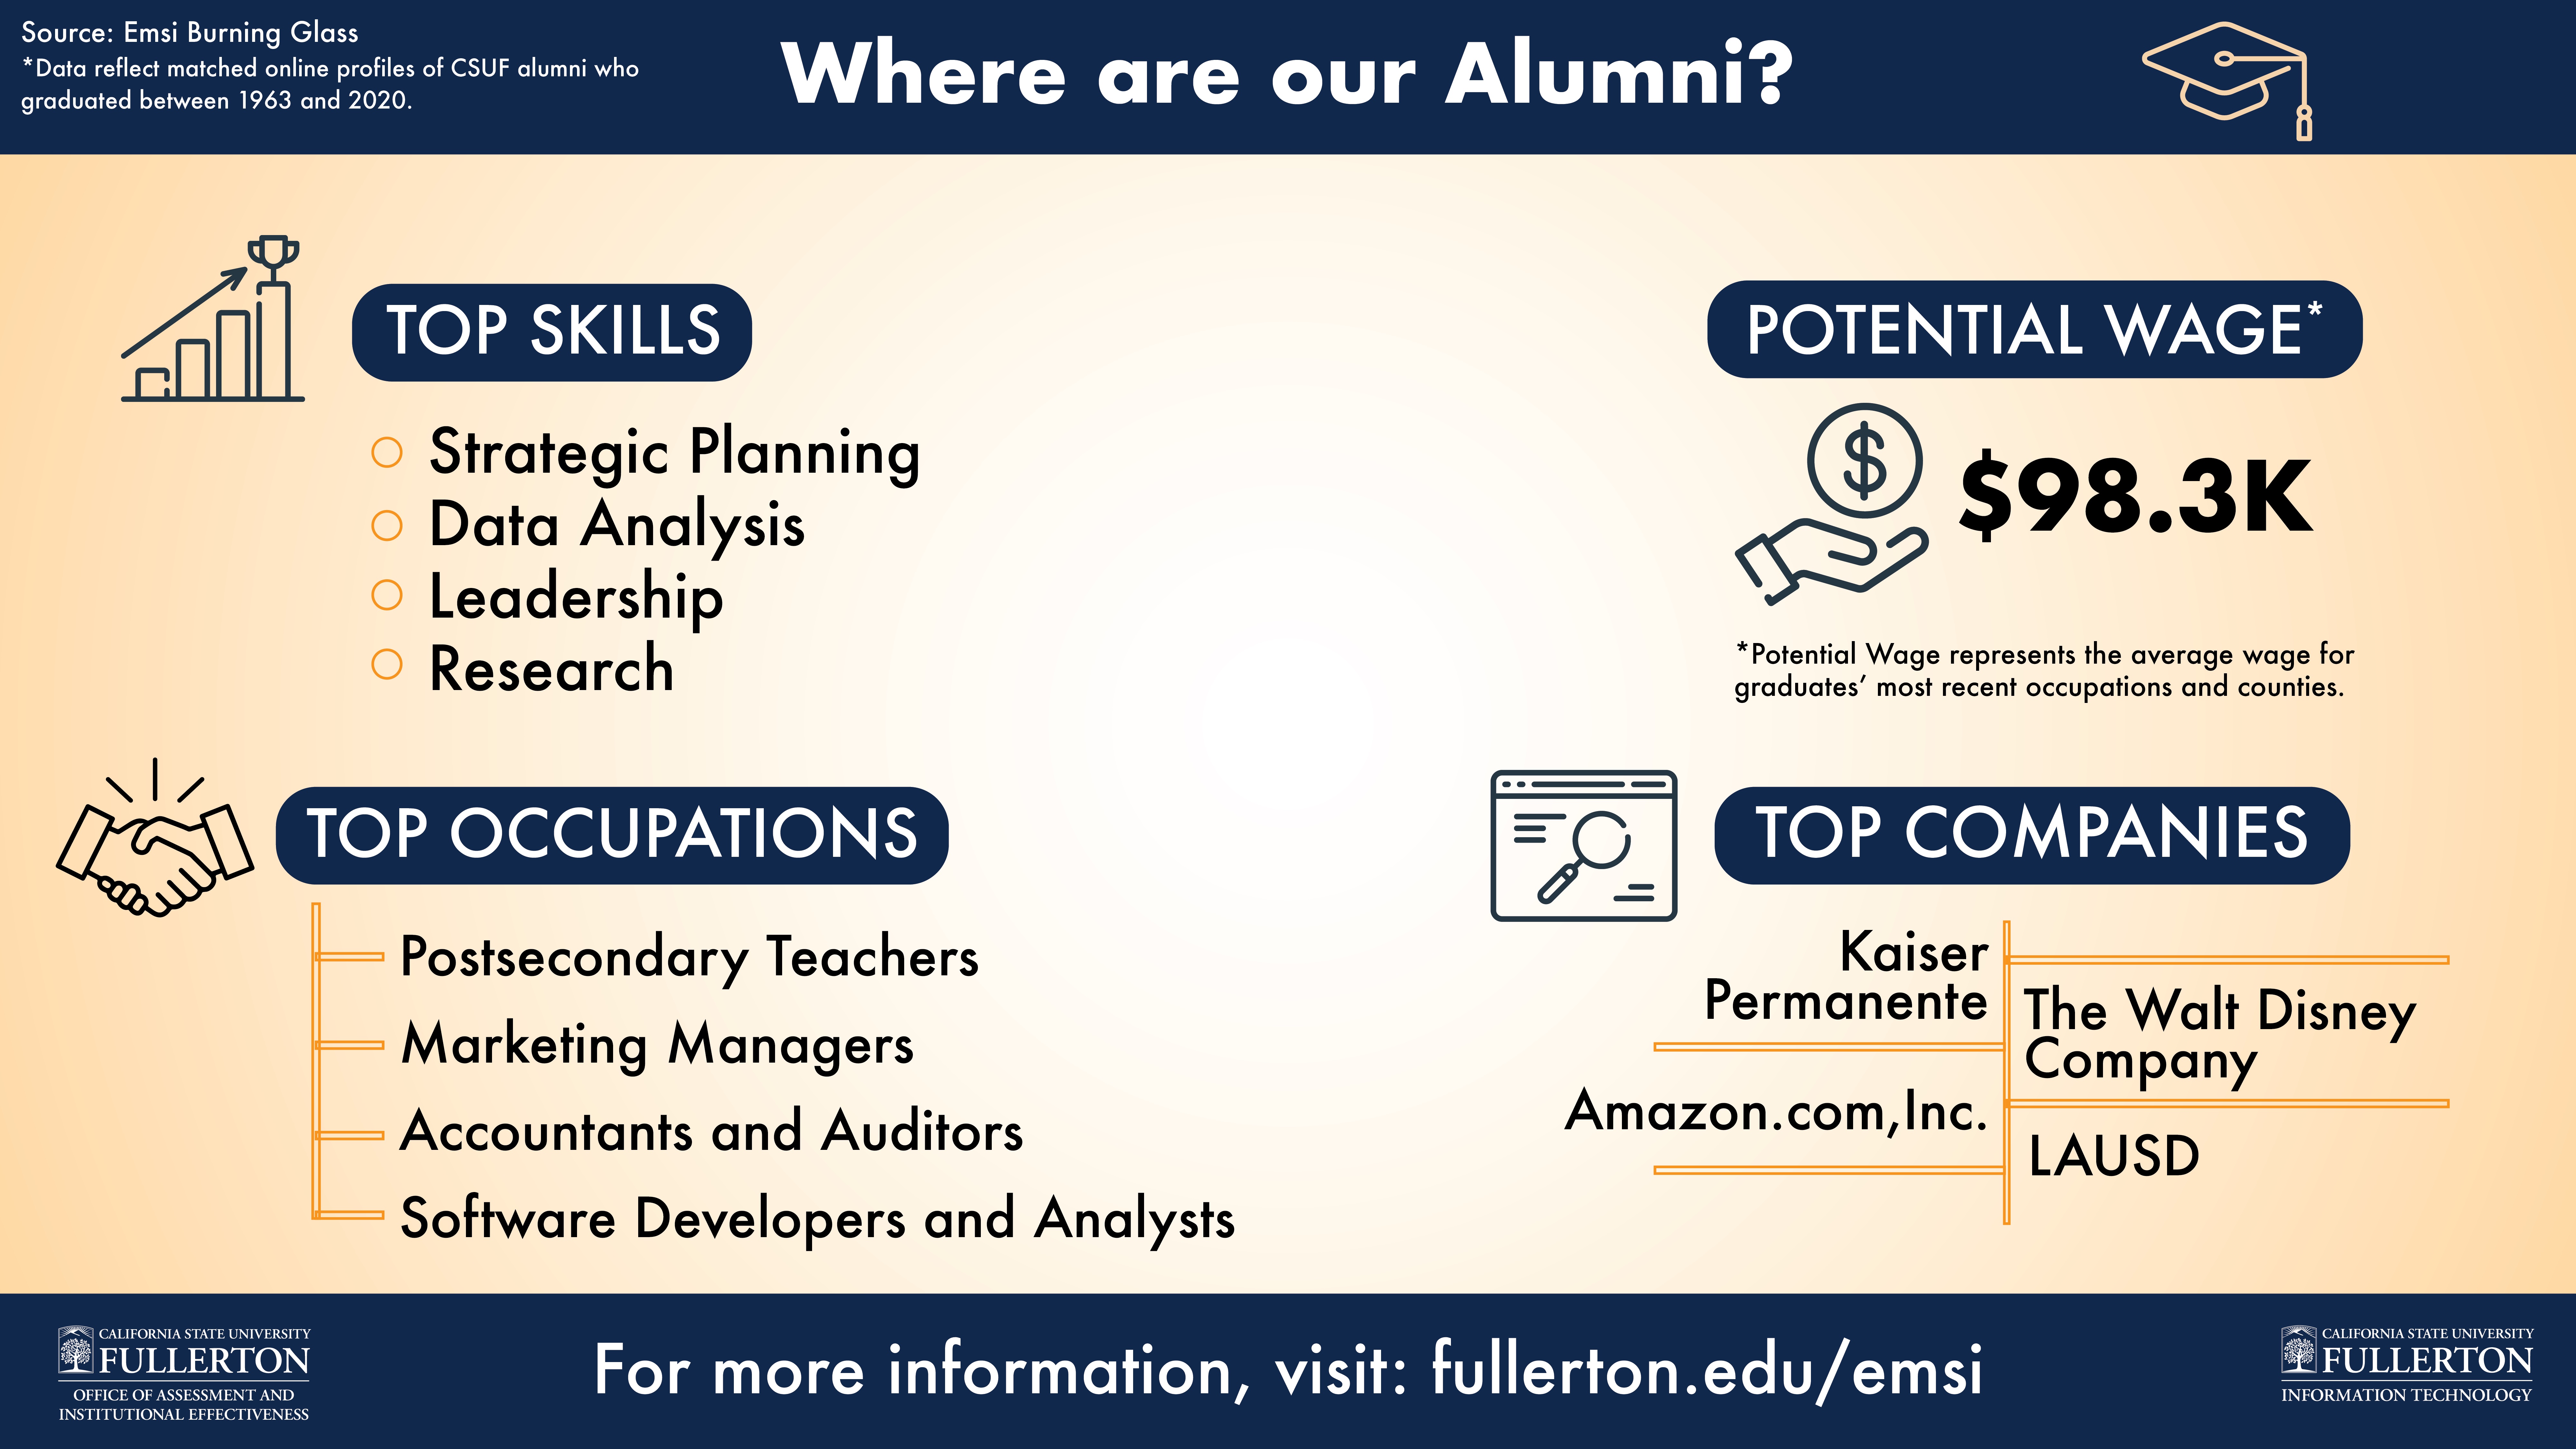 Alumni Overview digital sign example. Data previously shared in this article is presented in a visual format.